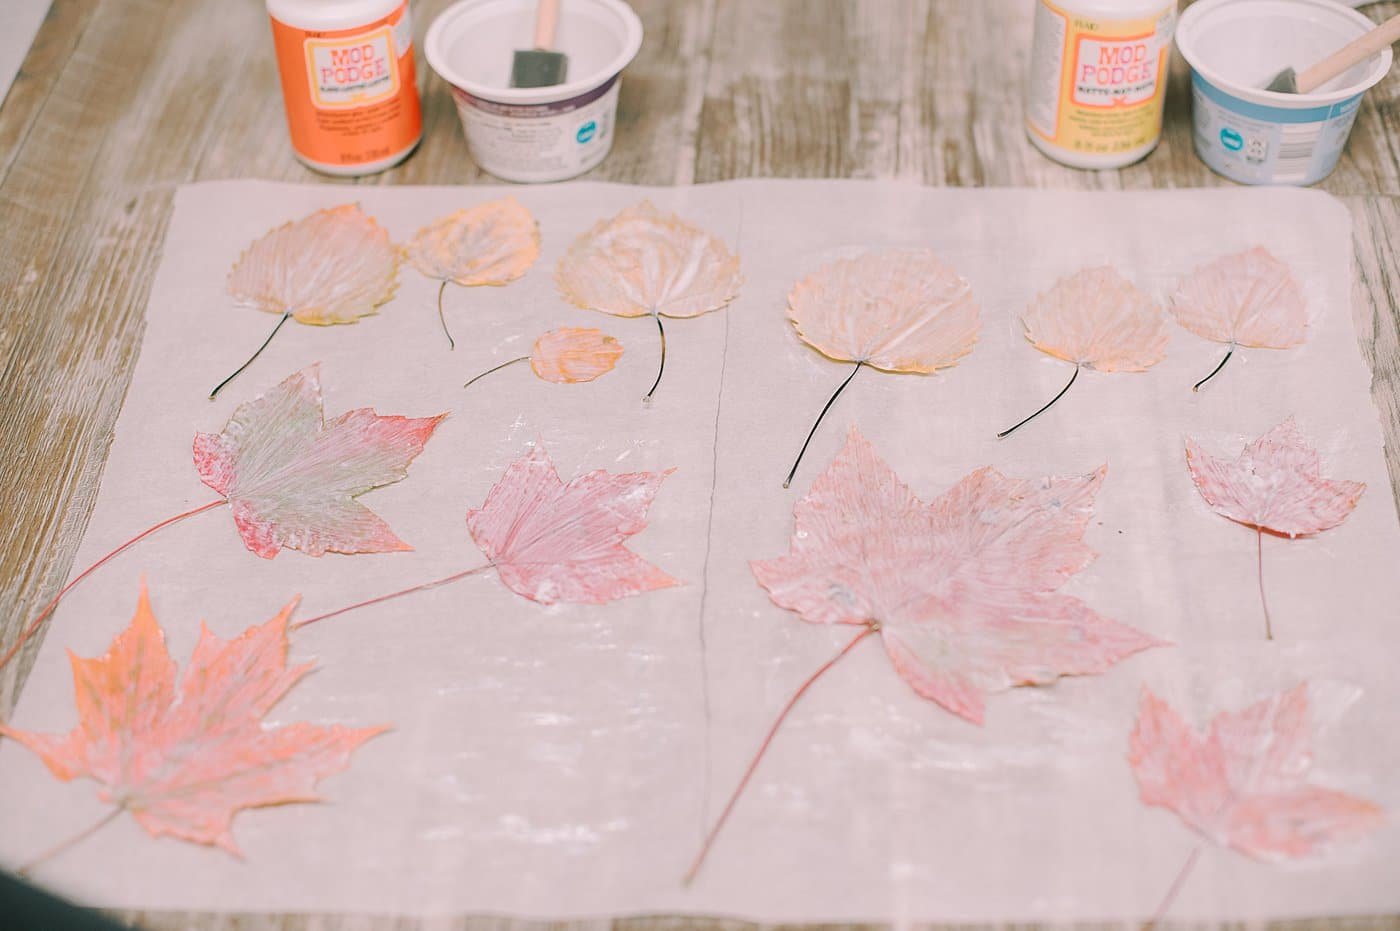 Flip the leaves over and add a layer of Mod Podge to the other side. Repeat with a second layer on the front side if desired. Let dry.